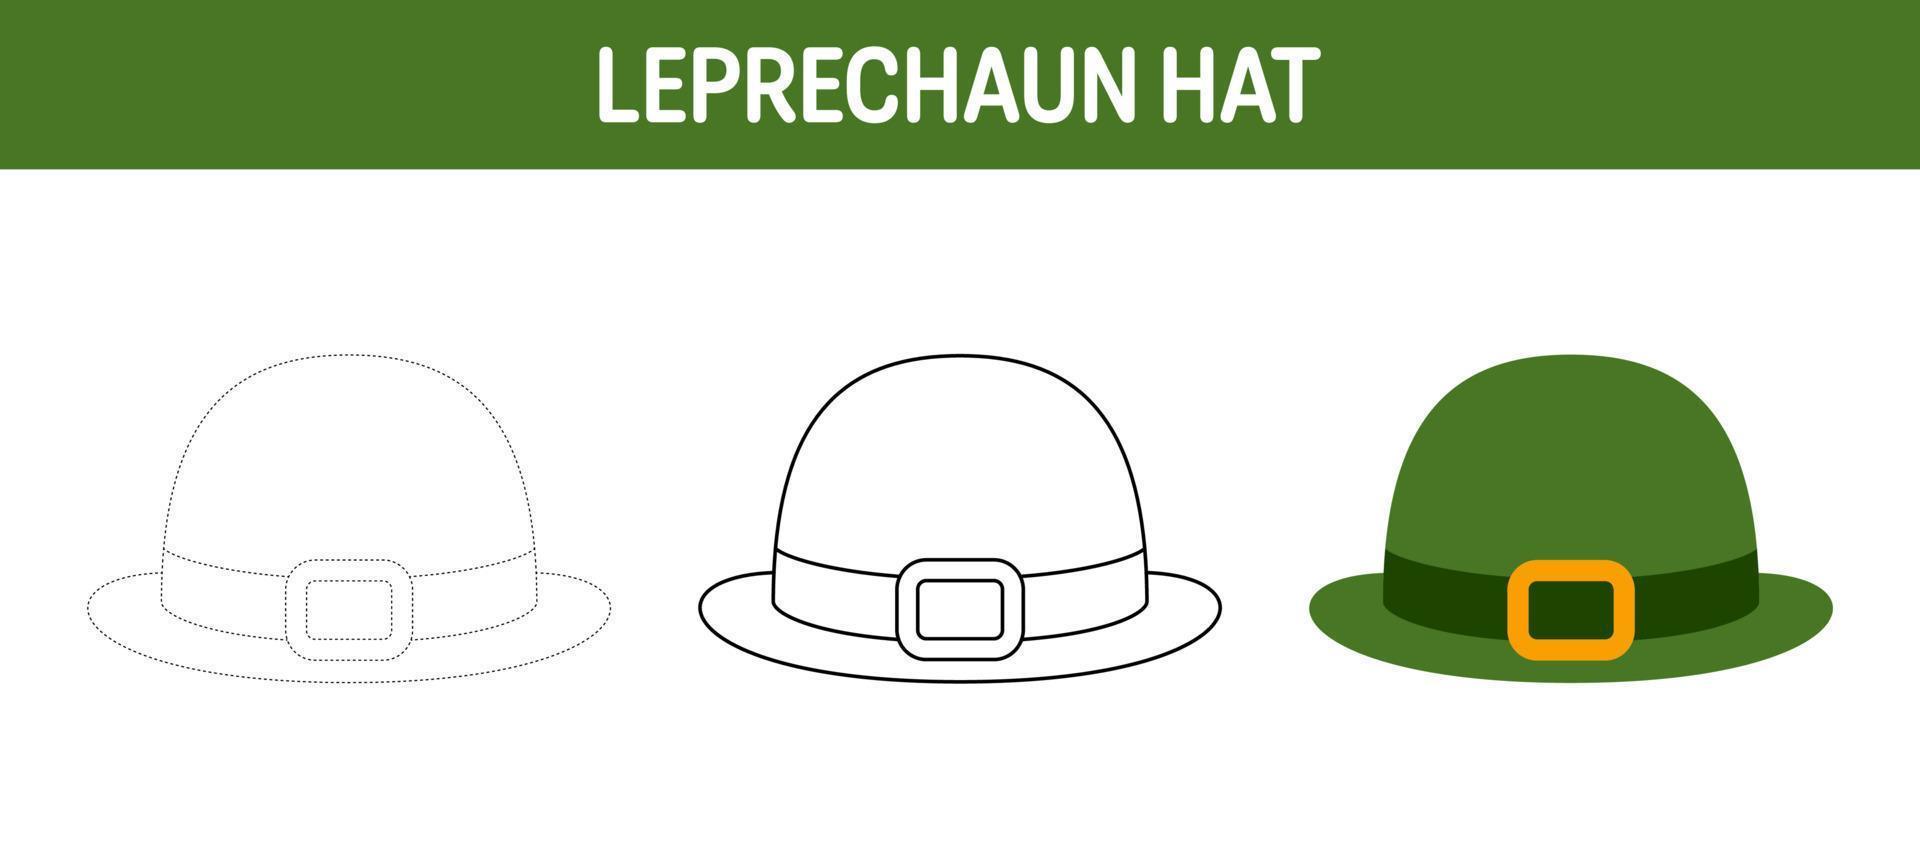 Leprechaun Hat tracing and coloring worksheet for kids vector